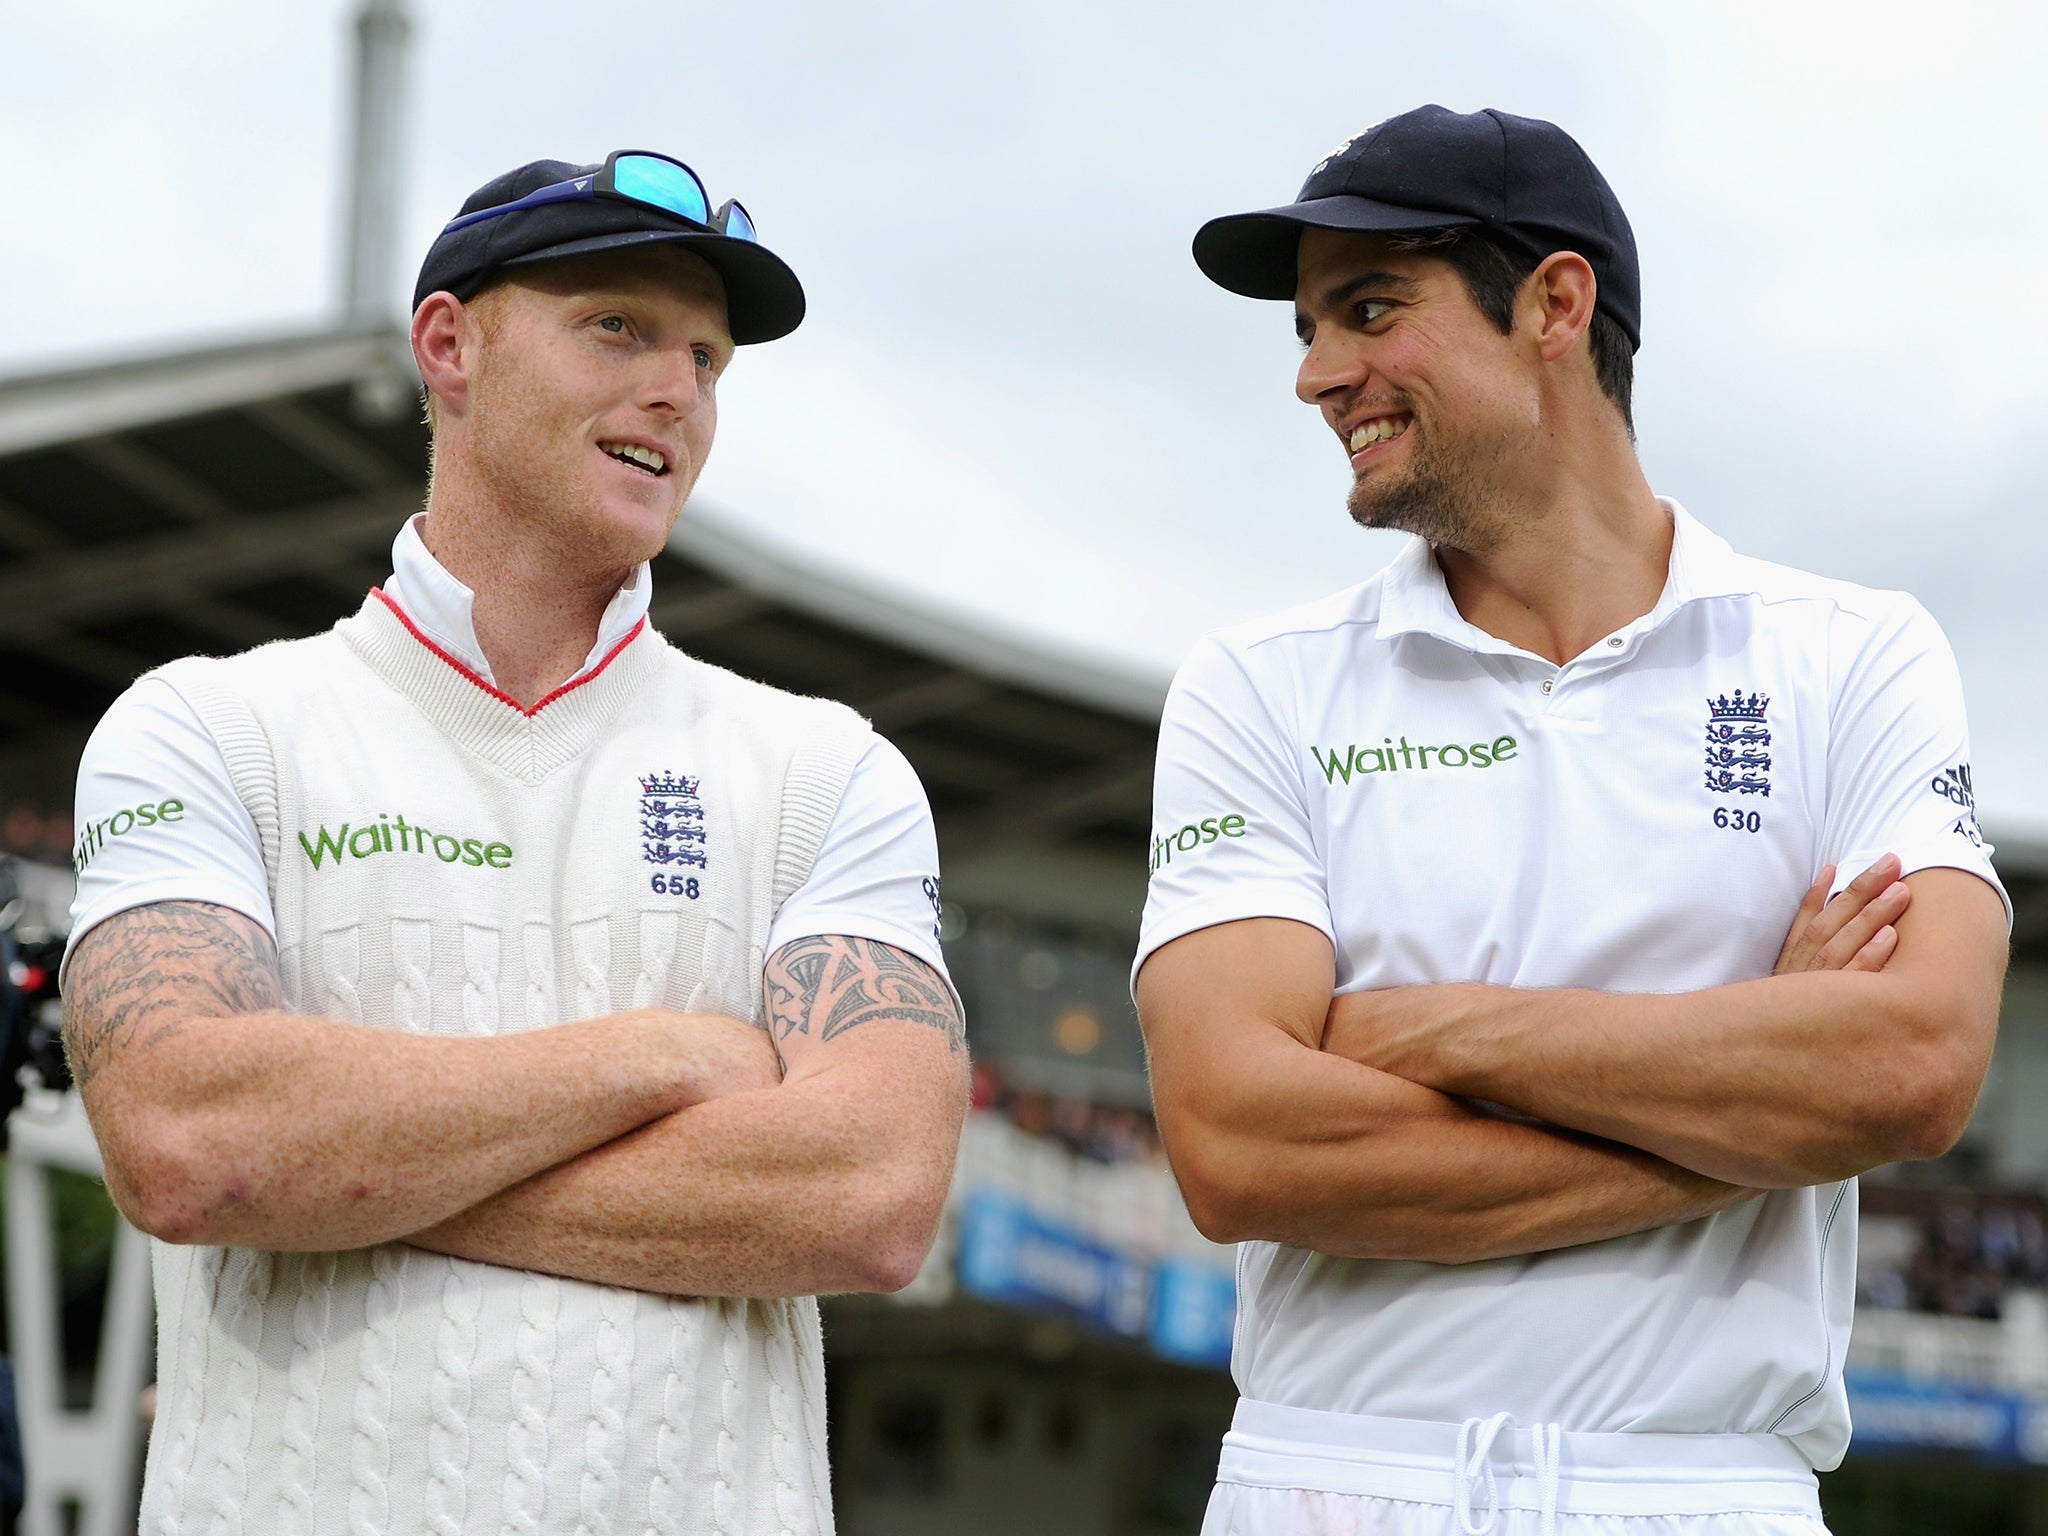 Ben Stokes, pictured left, had a dream game at Lord’s